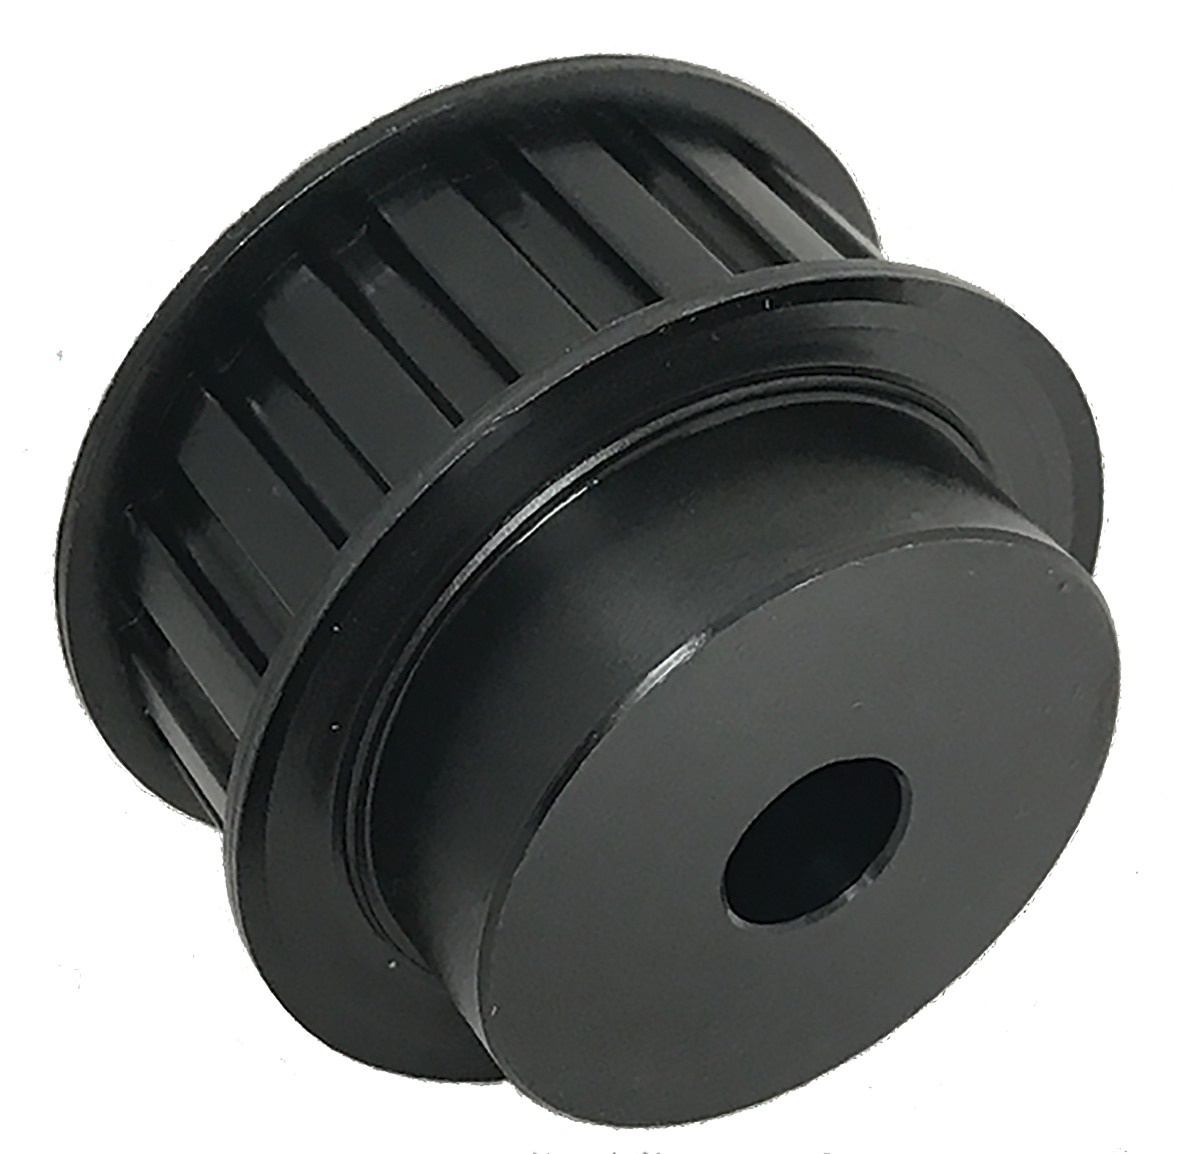 17H300-6FS8 - Steel Imperial Pitch Pulleys